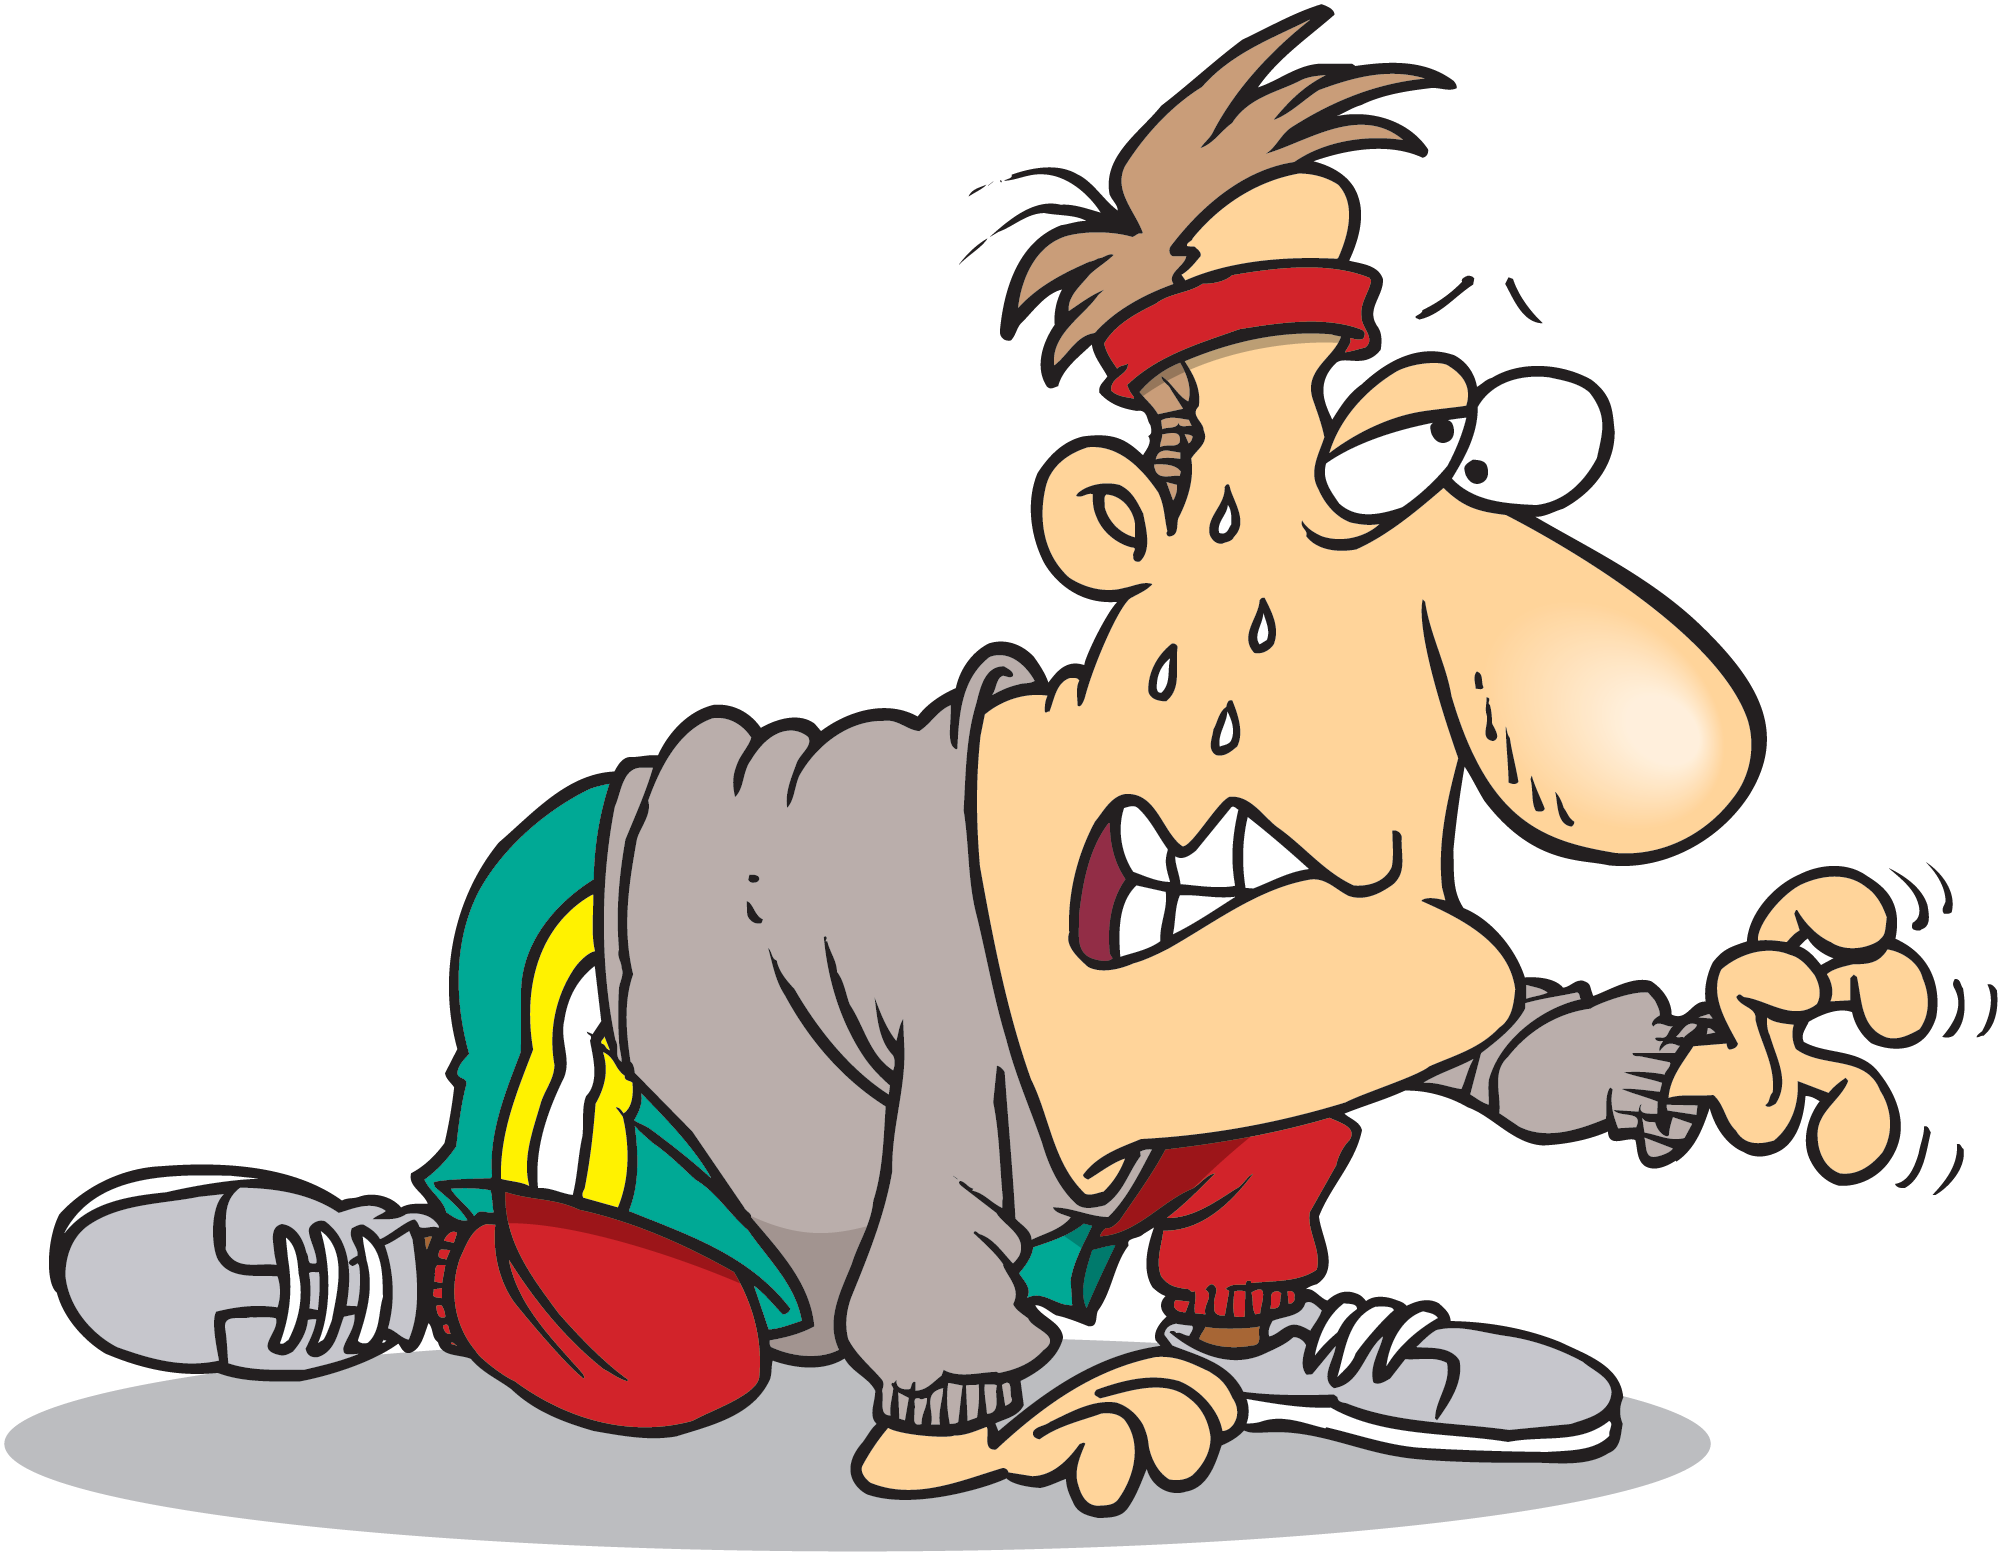 Tired Cartoon Image - ClipArt Best